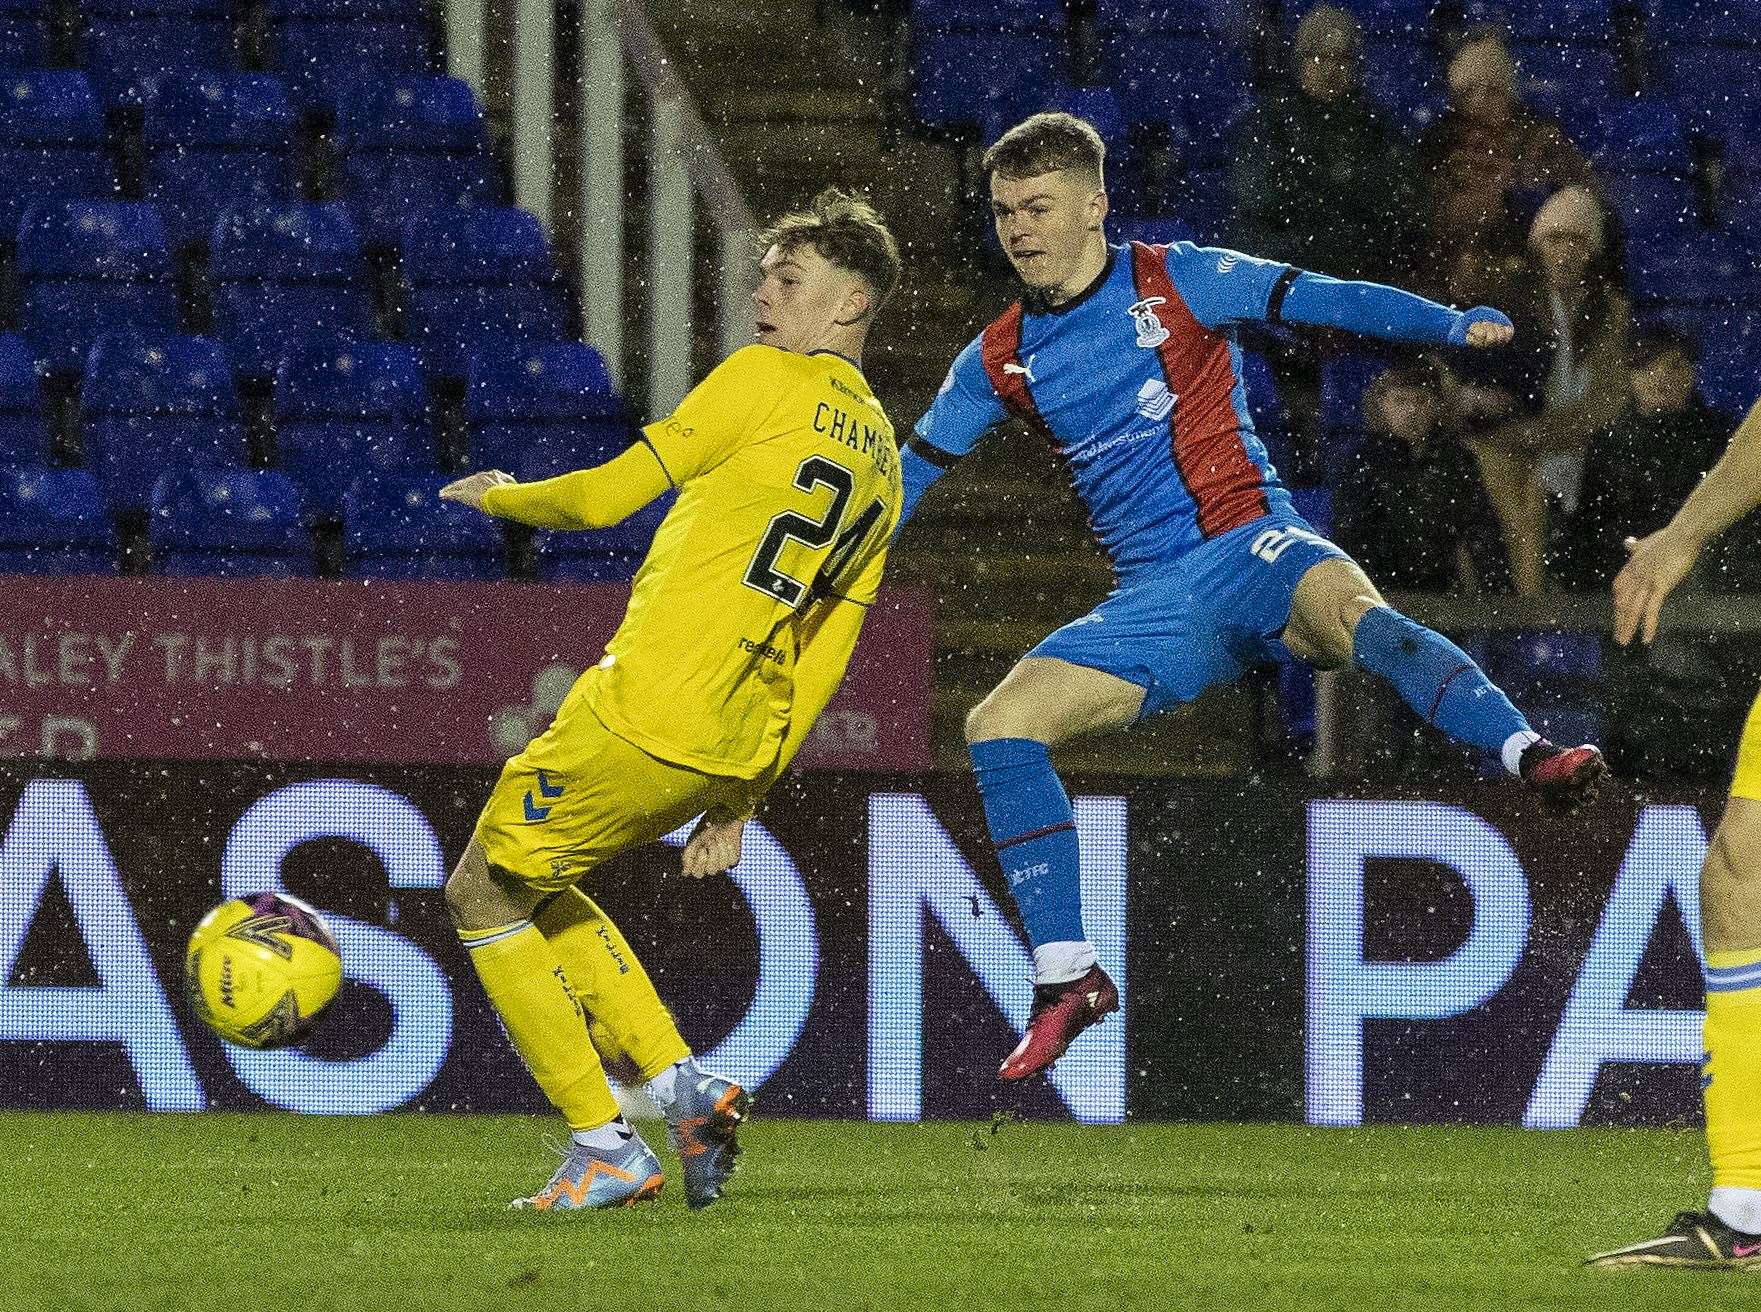 Jay Henderson played a key role in Caley Thistle's last win – against Kilmarnock in the Scottish Cup. Picture: Ken Macpherson